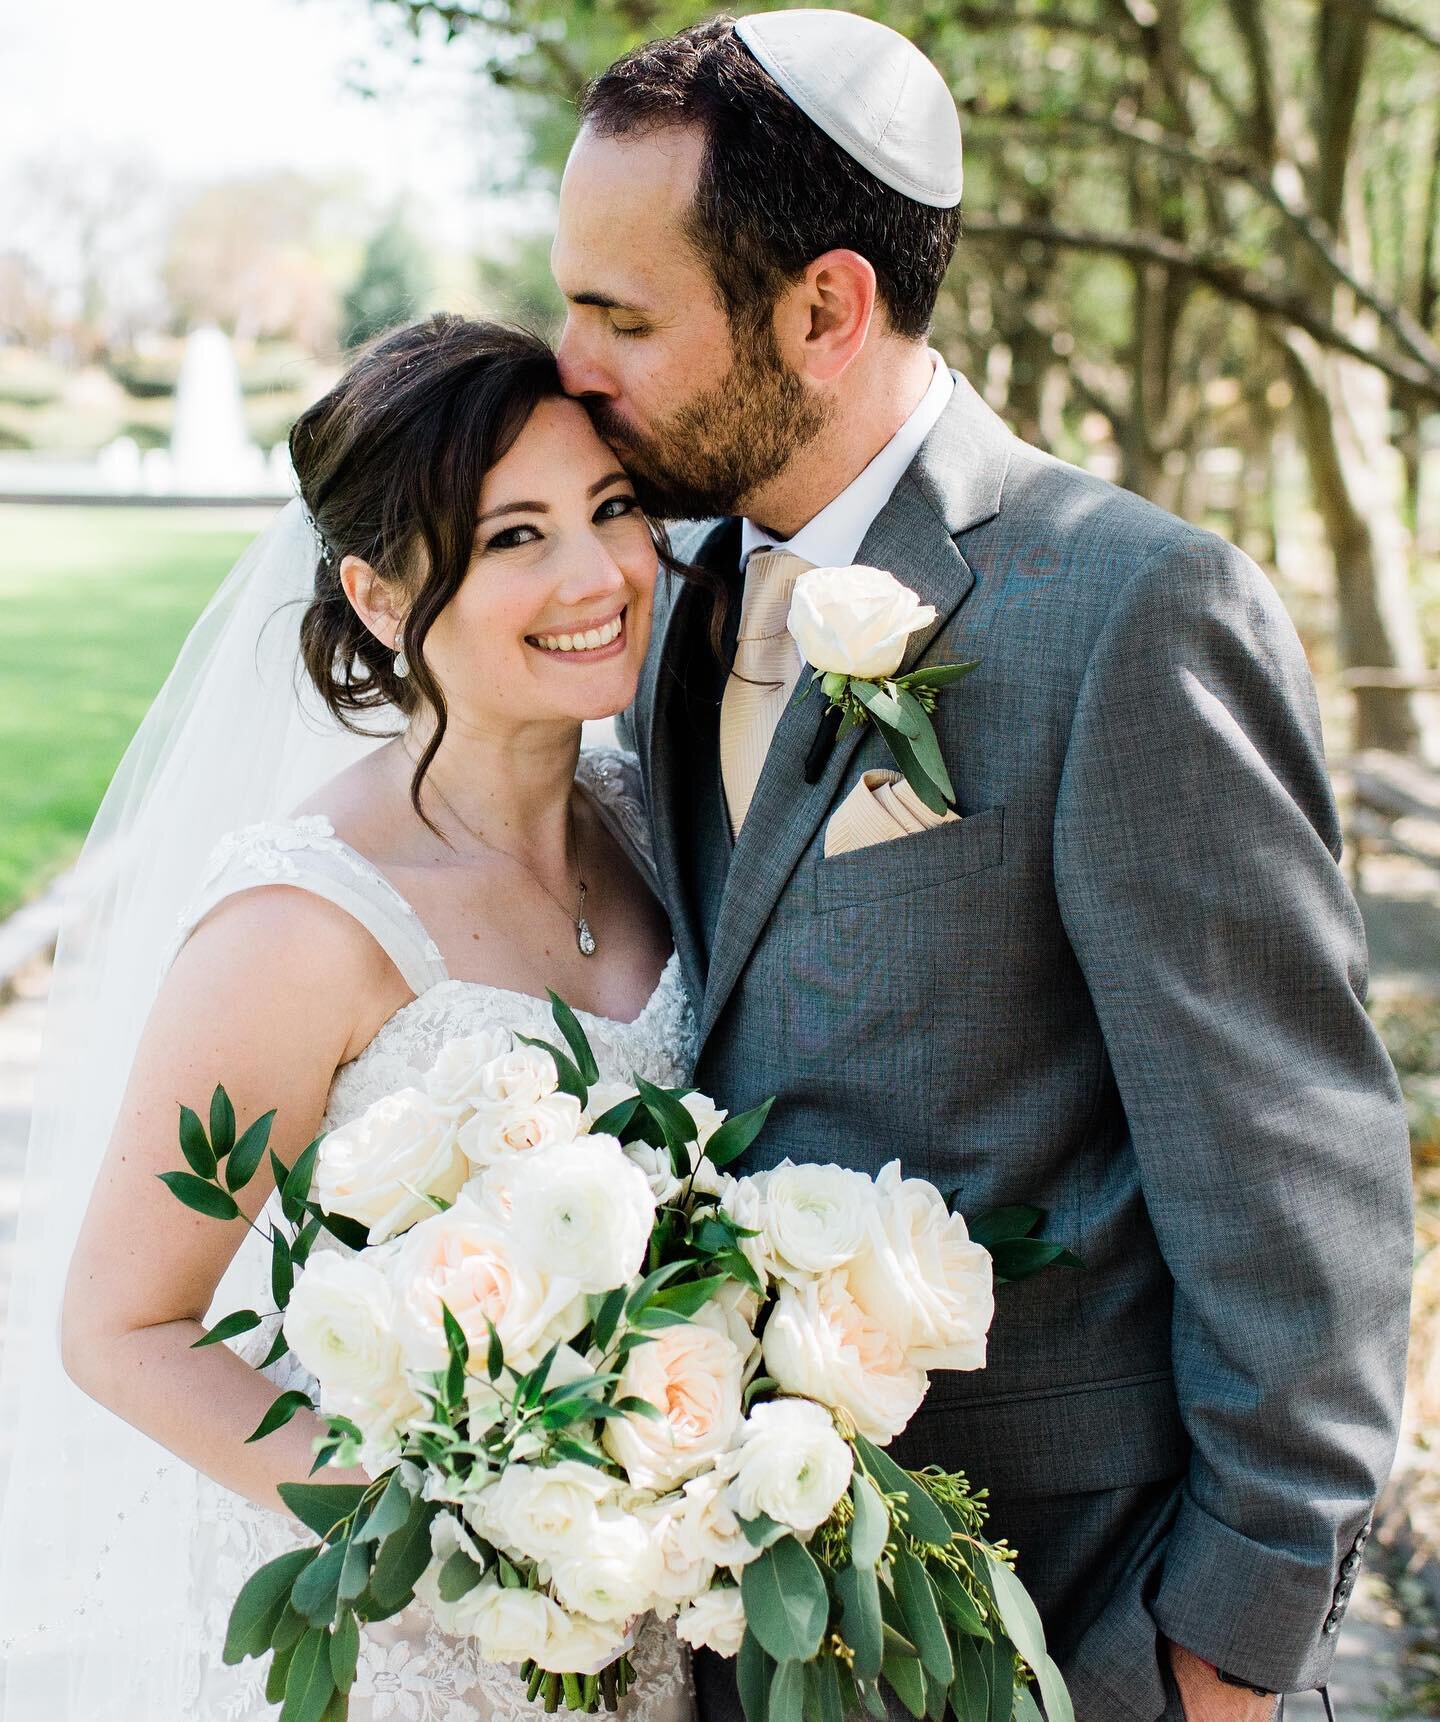 Melissa + Lance 

3.21.21❤️

Sarabeth Events @sarabethevents 
Texas Discovery Gardens at Fair Park @texasdiscoverygardens 
Two Sisters Catering @cateringtwosisters
Parc21 @21parcofficial
Photography @sheltonsphotography 
Wedding Video Pros NTX @weddi